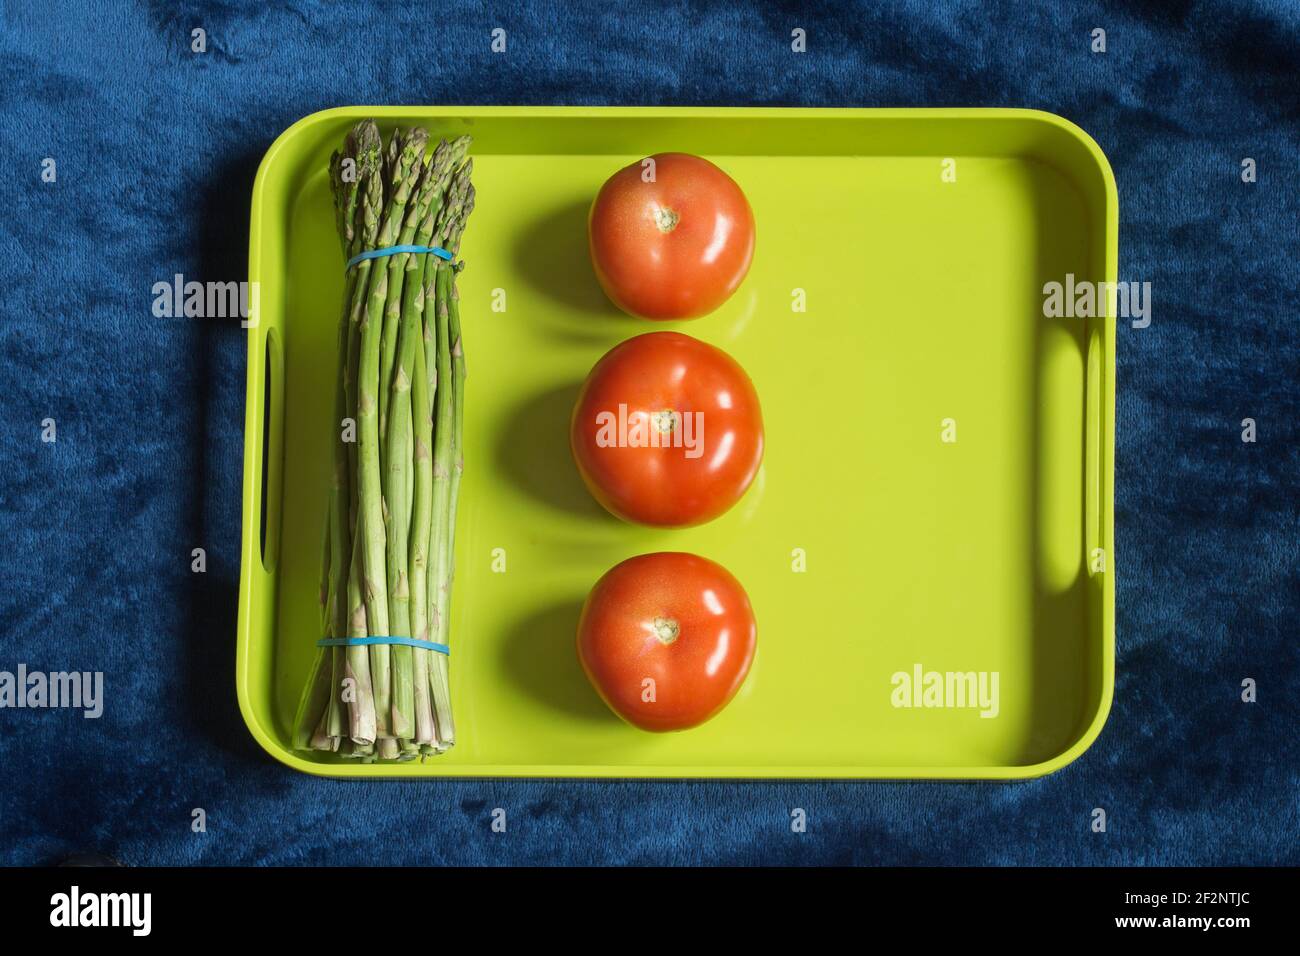 A green food tray with alienated tomatoes and a bunch of wild asparagus on a blue fabric texture background. Food, fruit, and vegetables. Stock Photo